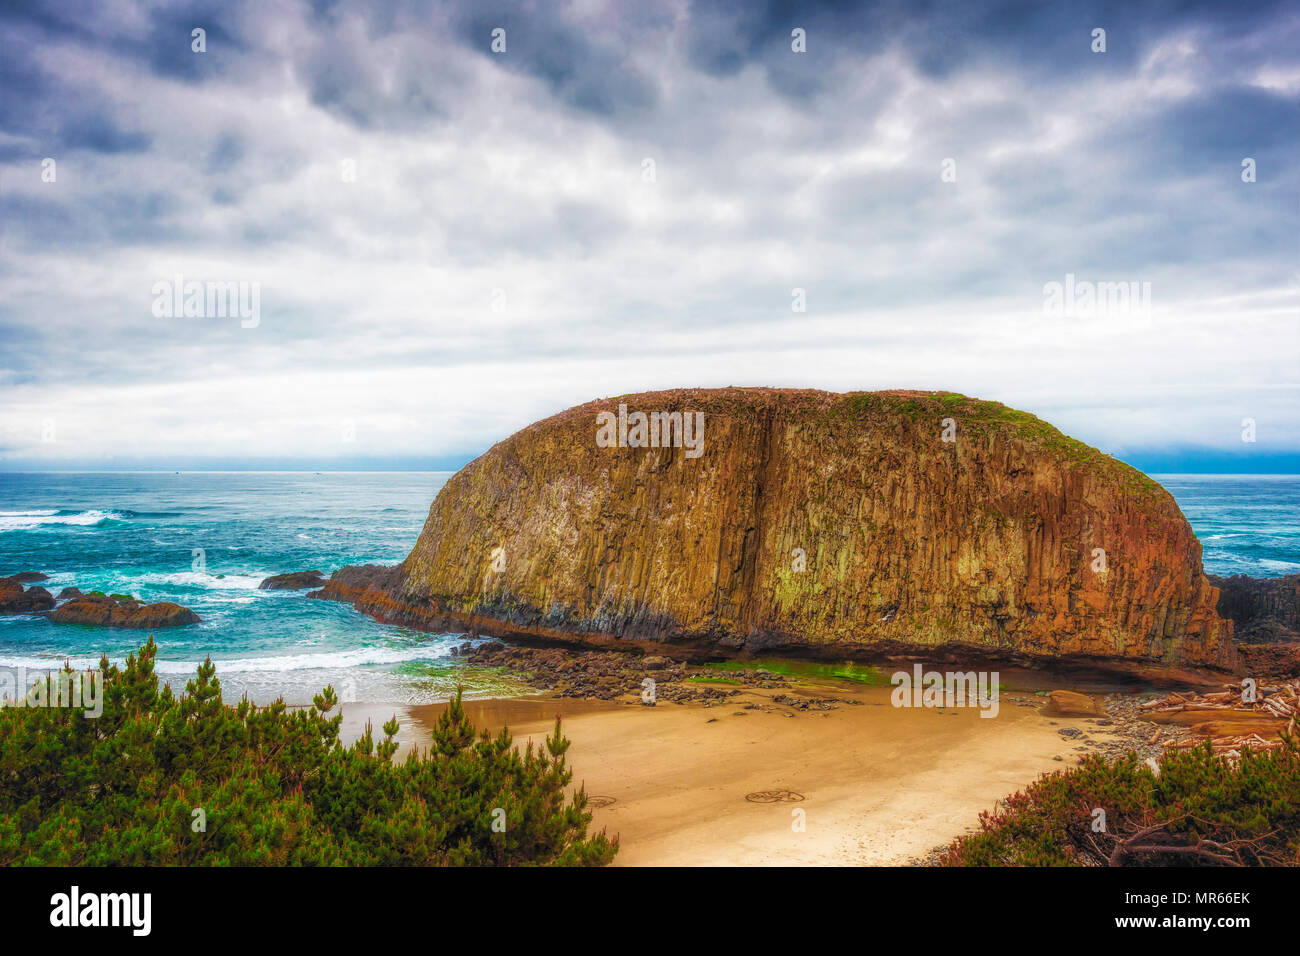 Oregon Coast Seal Rock stands majectic under marine and clouds layering the sky as one looks down from above with the tops of pine trees in the foregr Stock Photo